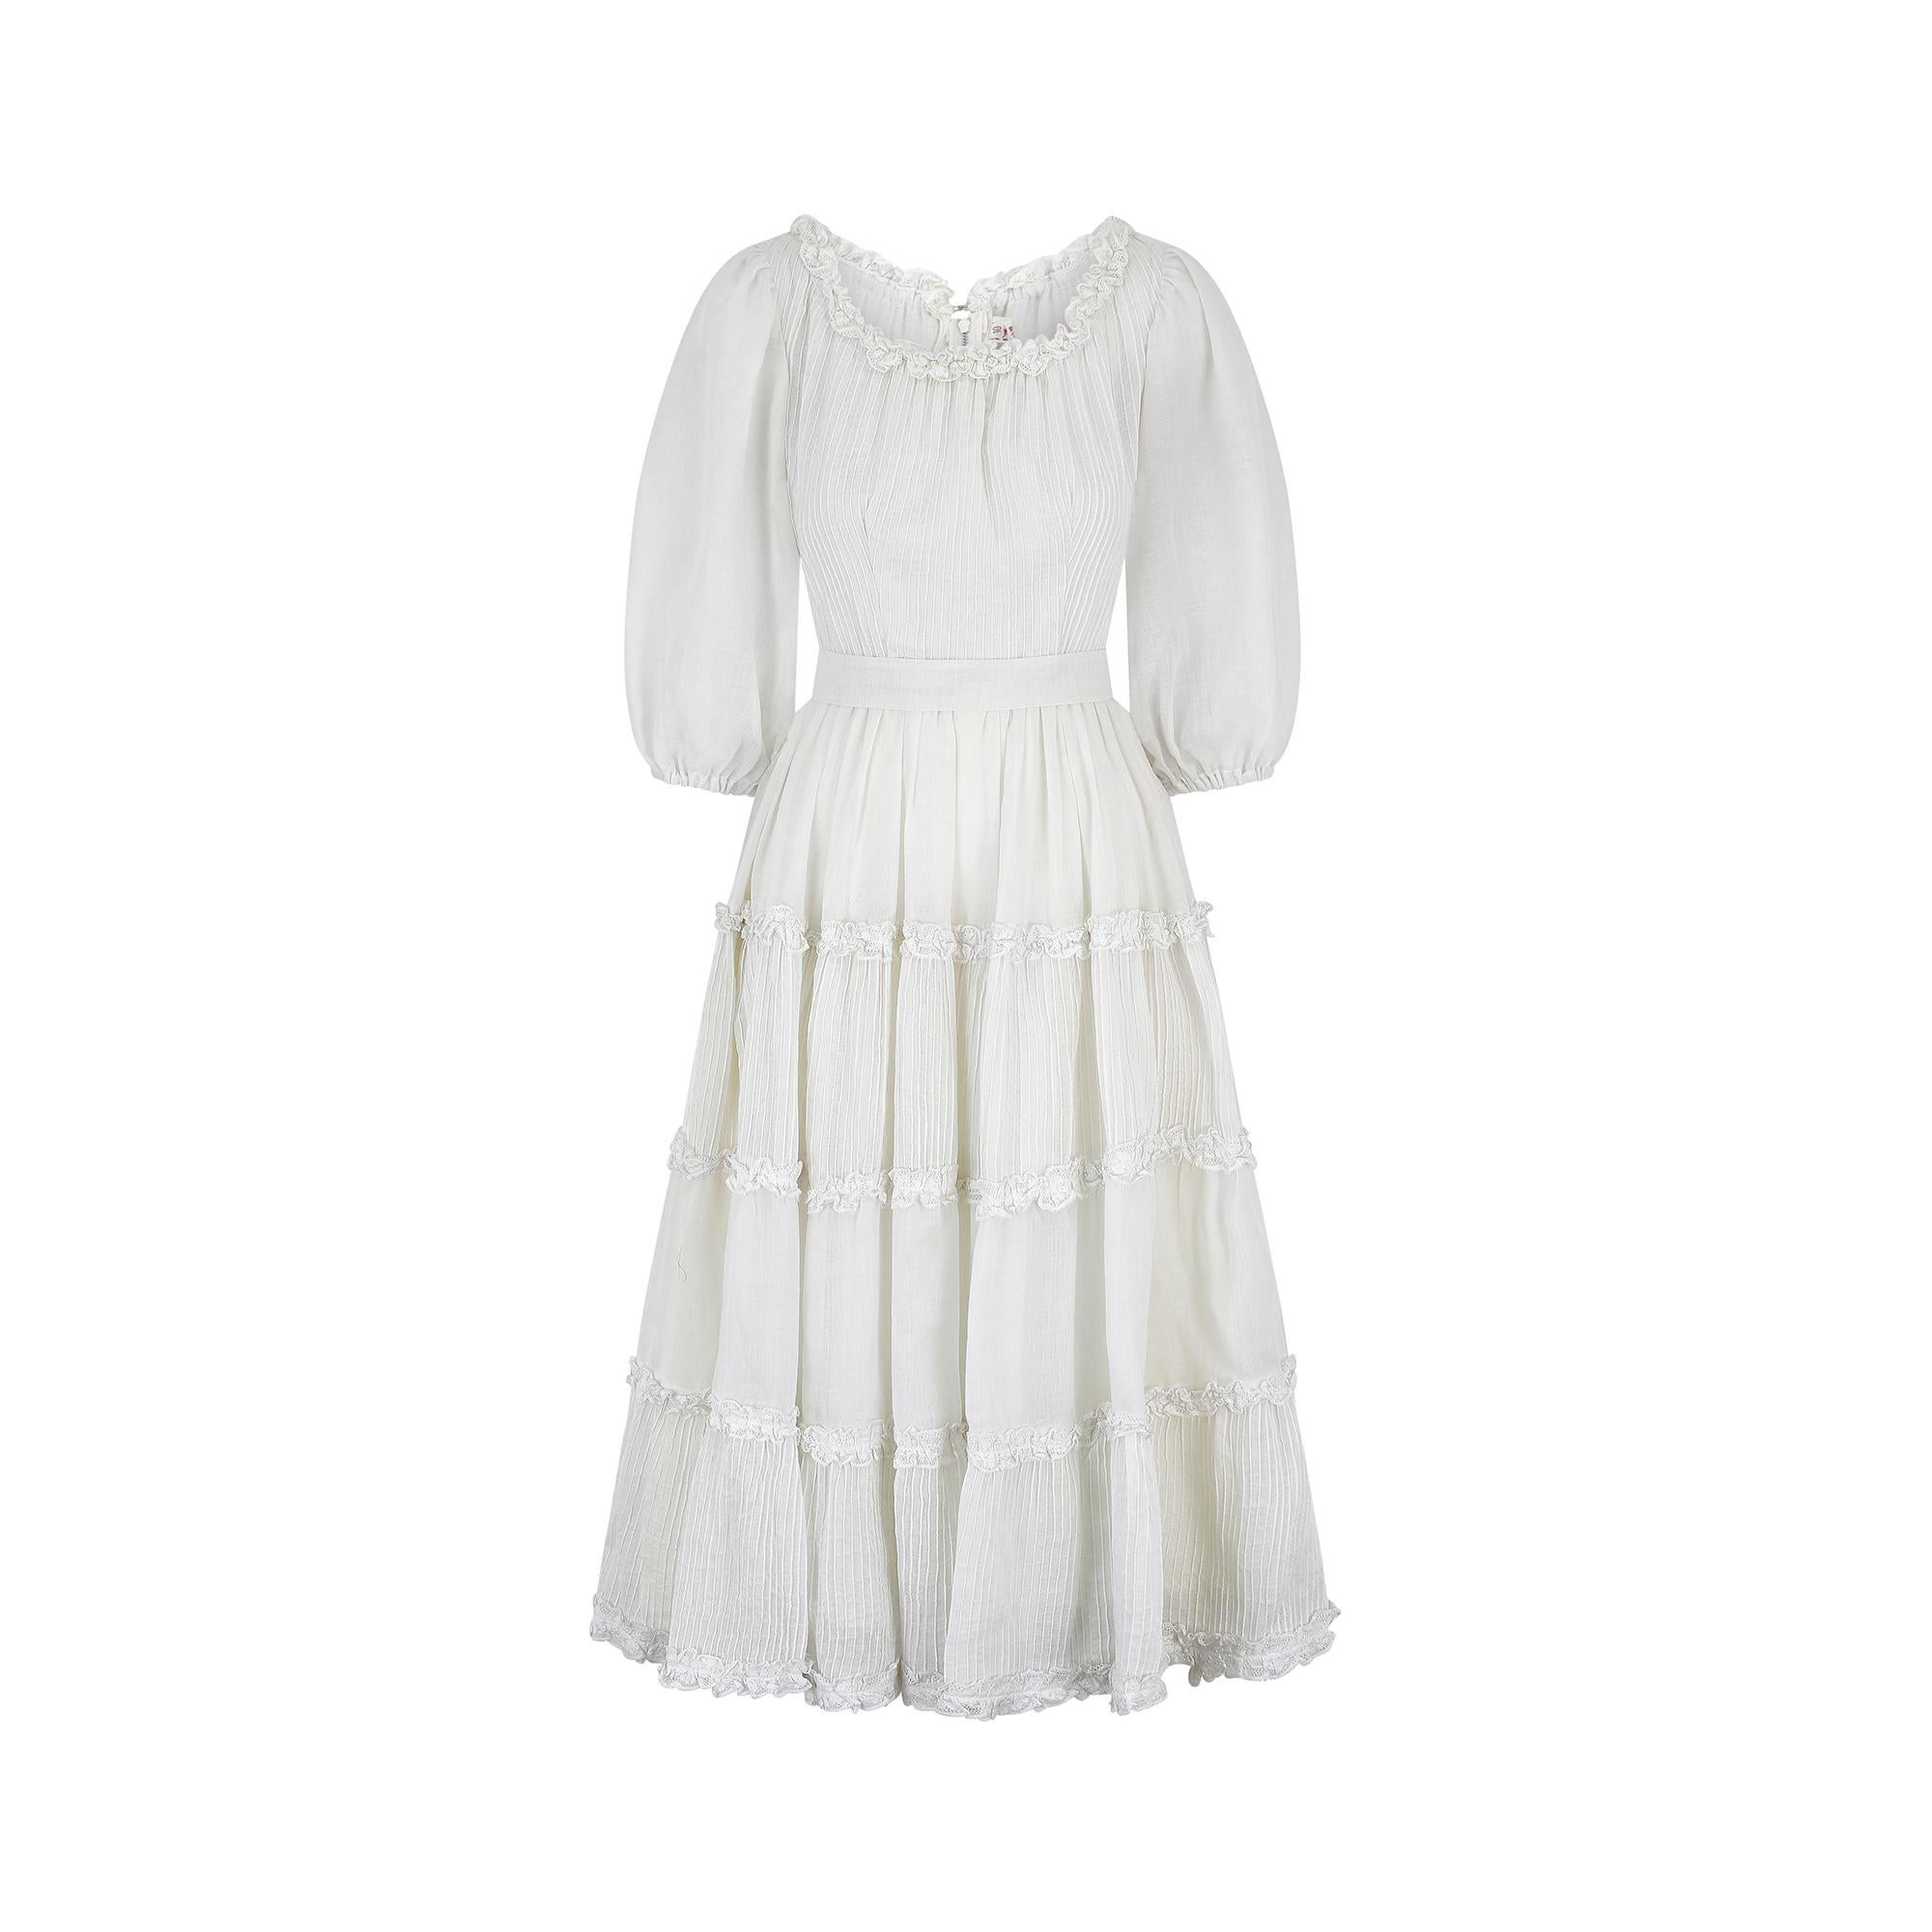 This 1970s original vintage white cotton Mexican wedding dress is in impeccable vintage condition and it's romantic, fairy-tale aesthetic would make for a captivating boho bride.  Of fine, cotton muslin, the mid-length skirt falls in gentle folds